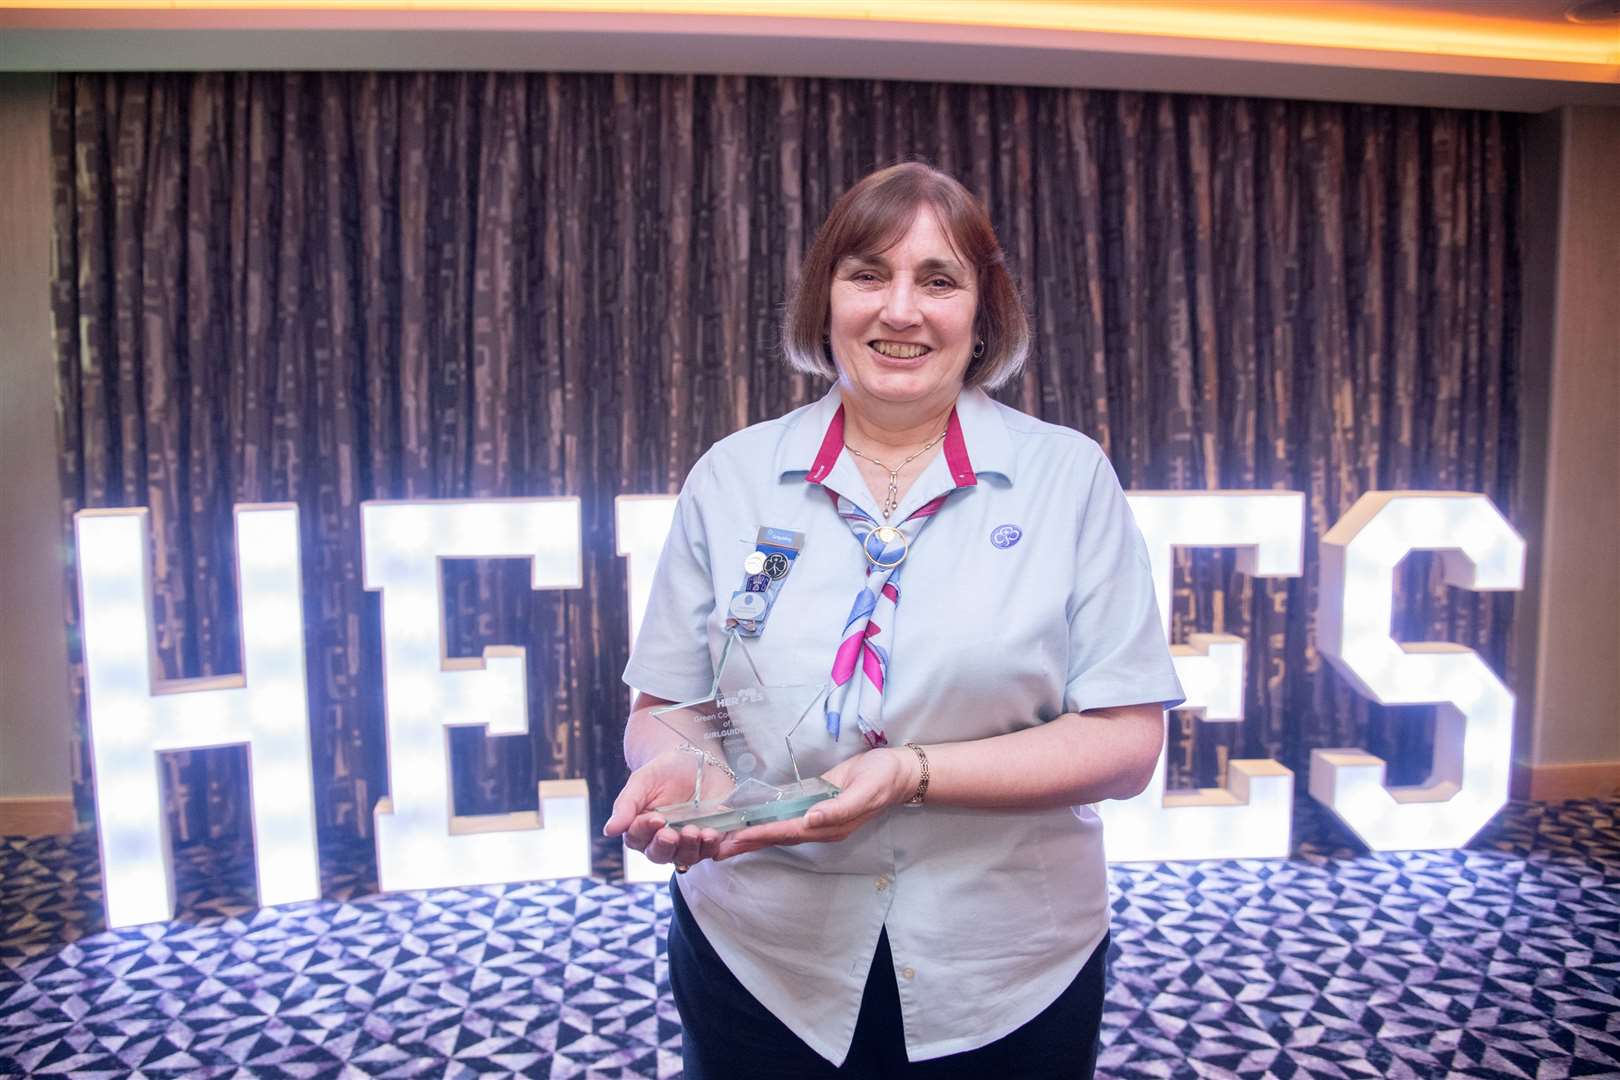 Green Community Venture of the Year Award - sponsored by Vattenfall - was Girlguiding Moray, with Louise Winder collecting the award.Moray and Banffshire Heroes Awards 2024, held at the Banff Springs Hotel. Picture: Daniel Forsyth.